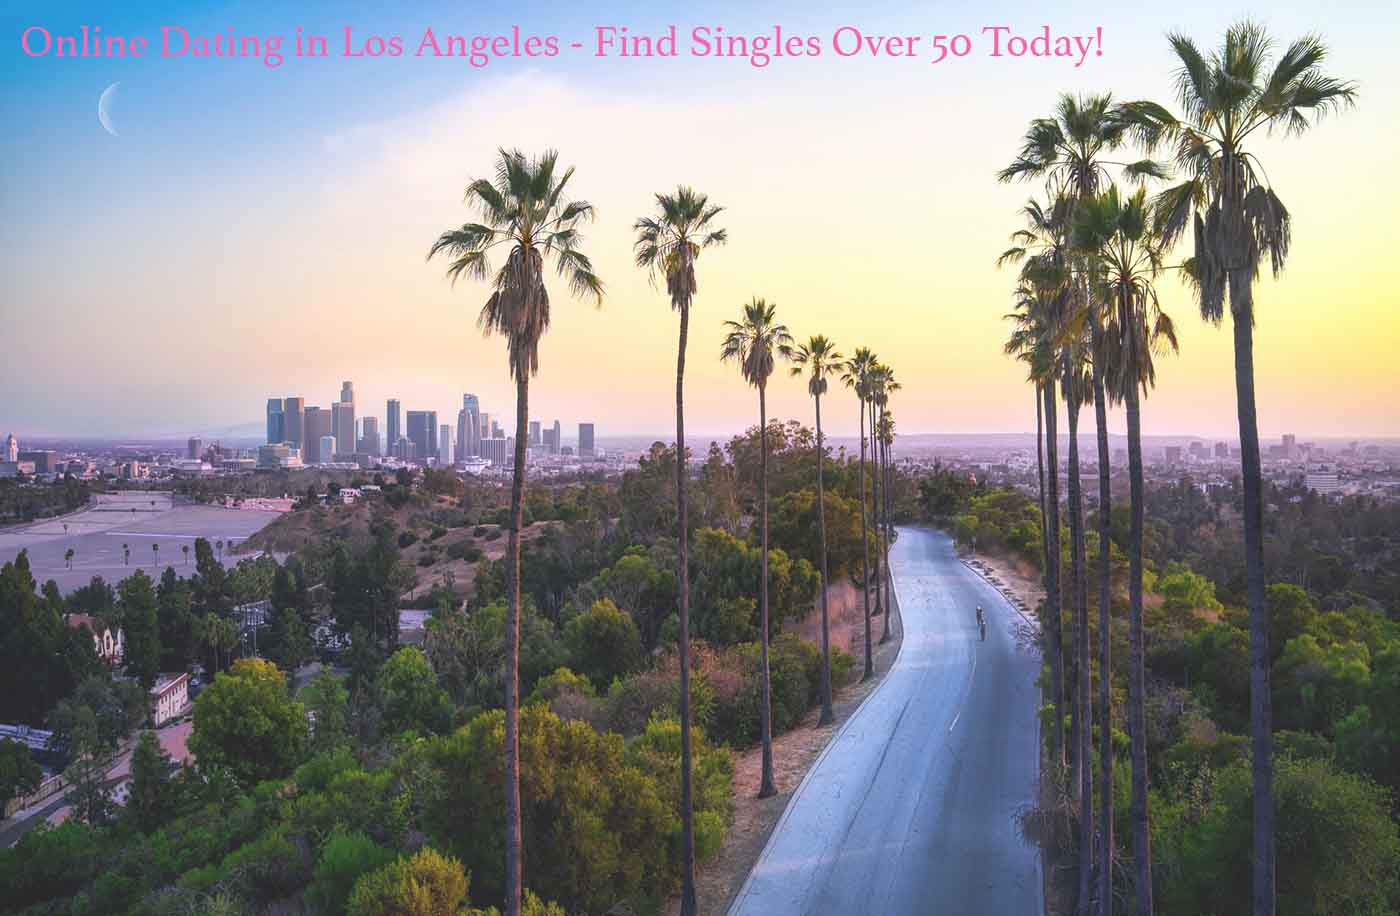 Online dating in Los Angeles, Singles over 50